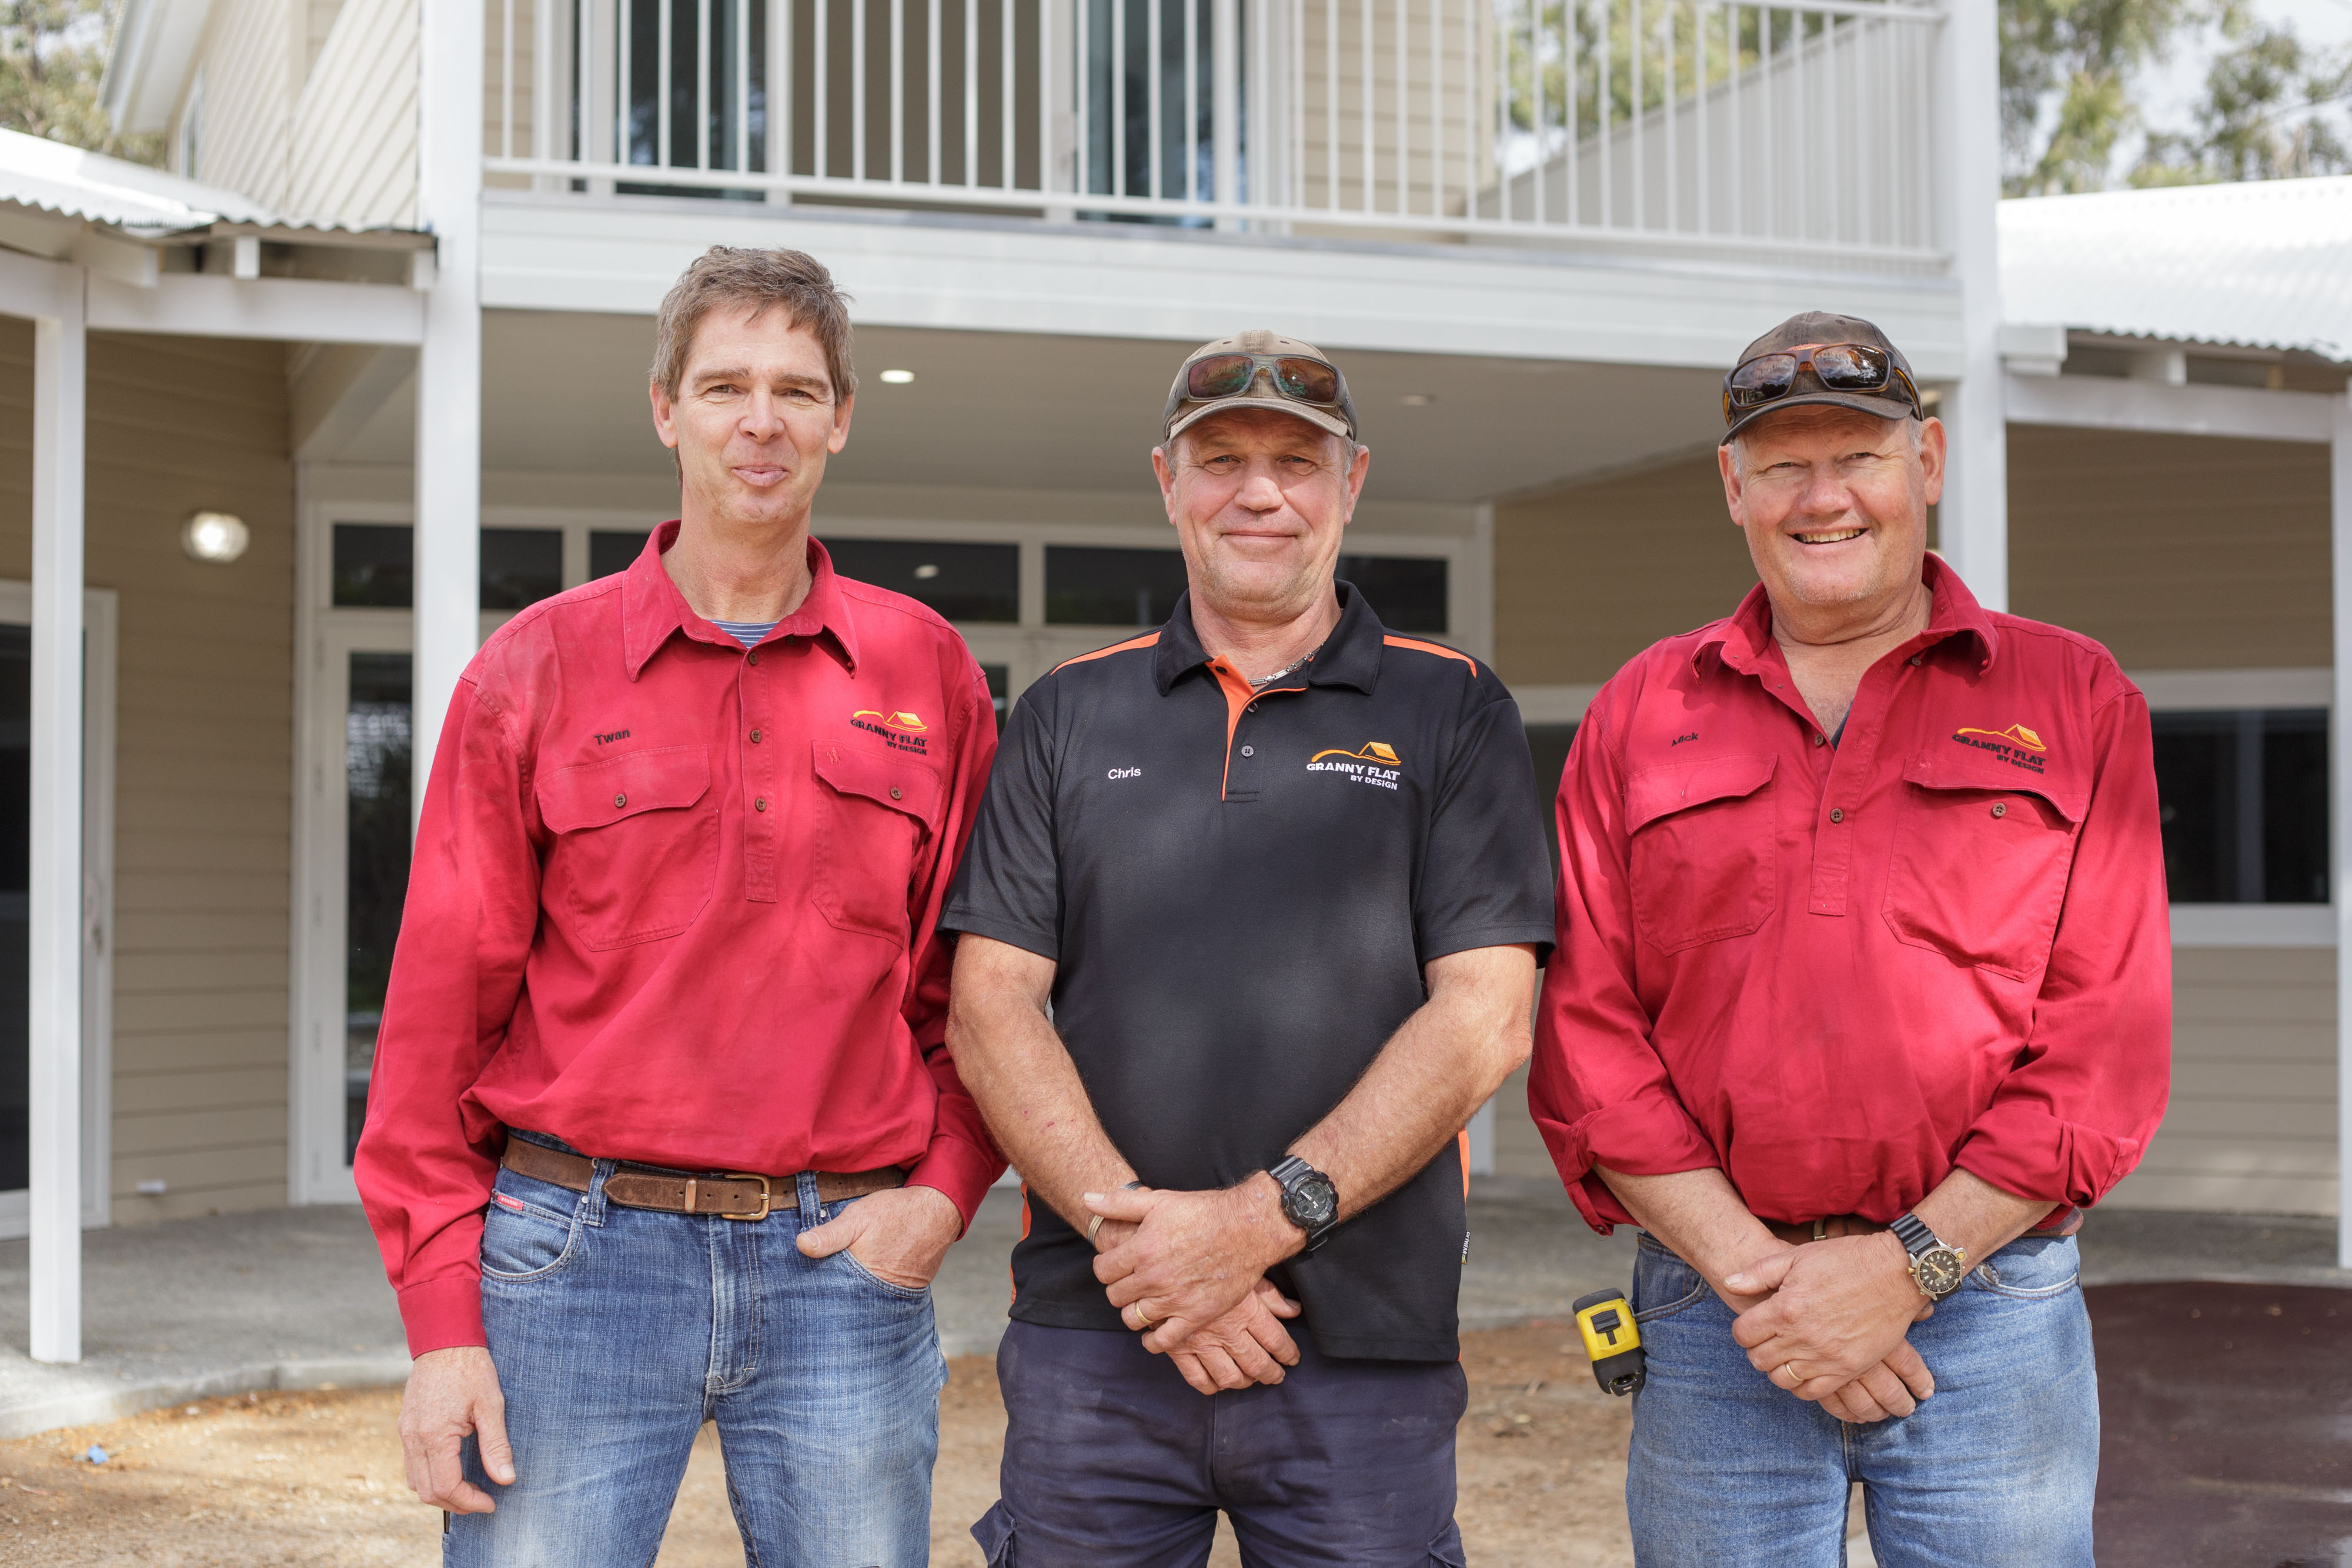 The Granny Flat By Design team, L-R Twan Smeets, Chris Arnold and Mick Tewes.